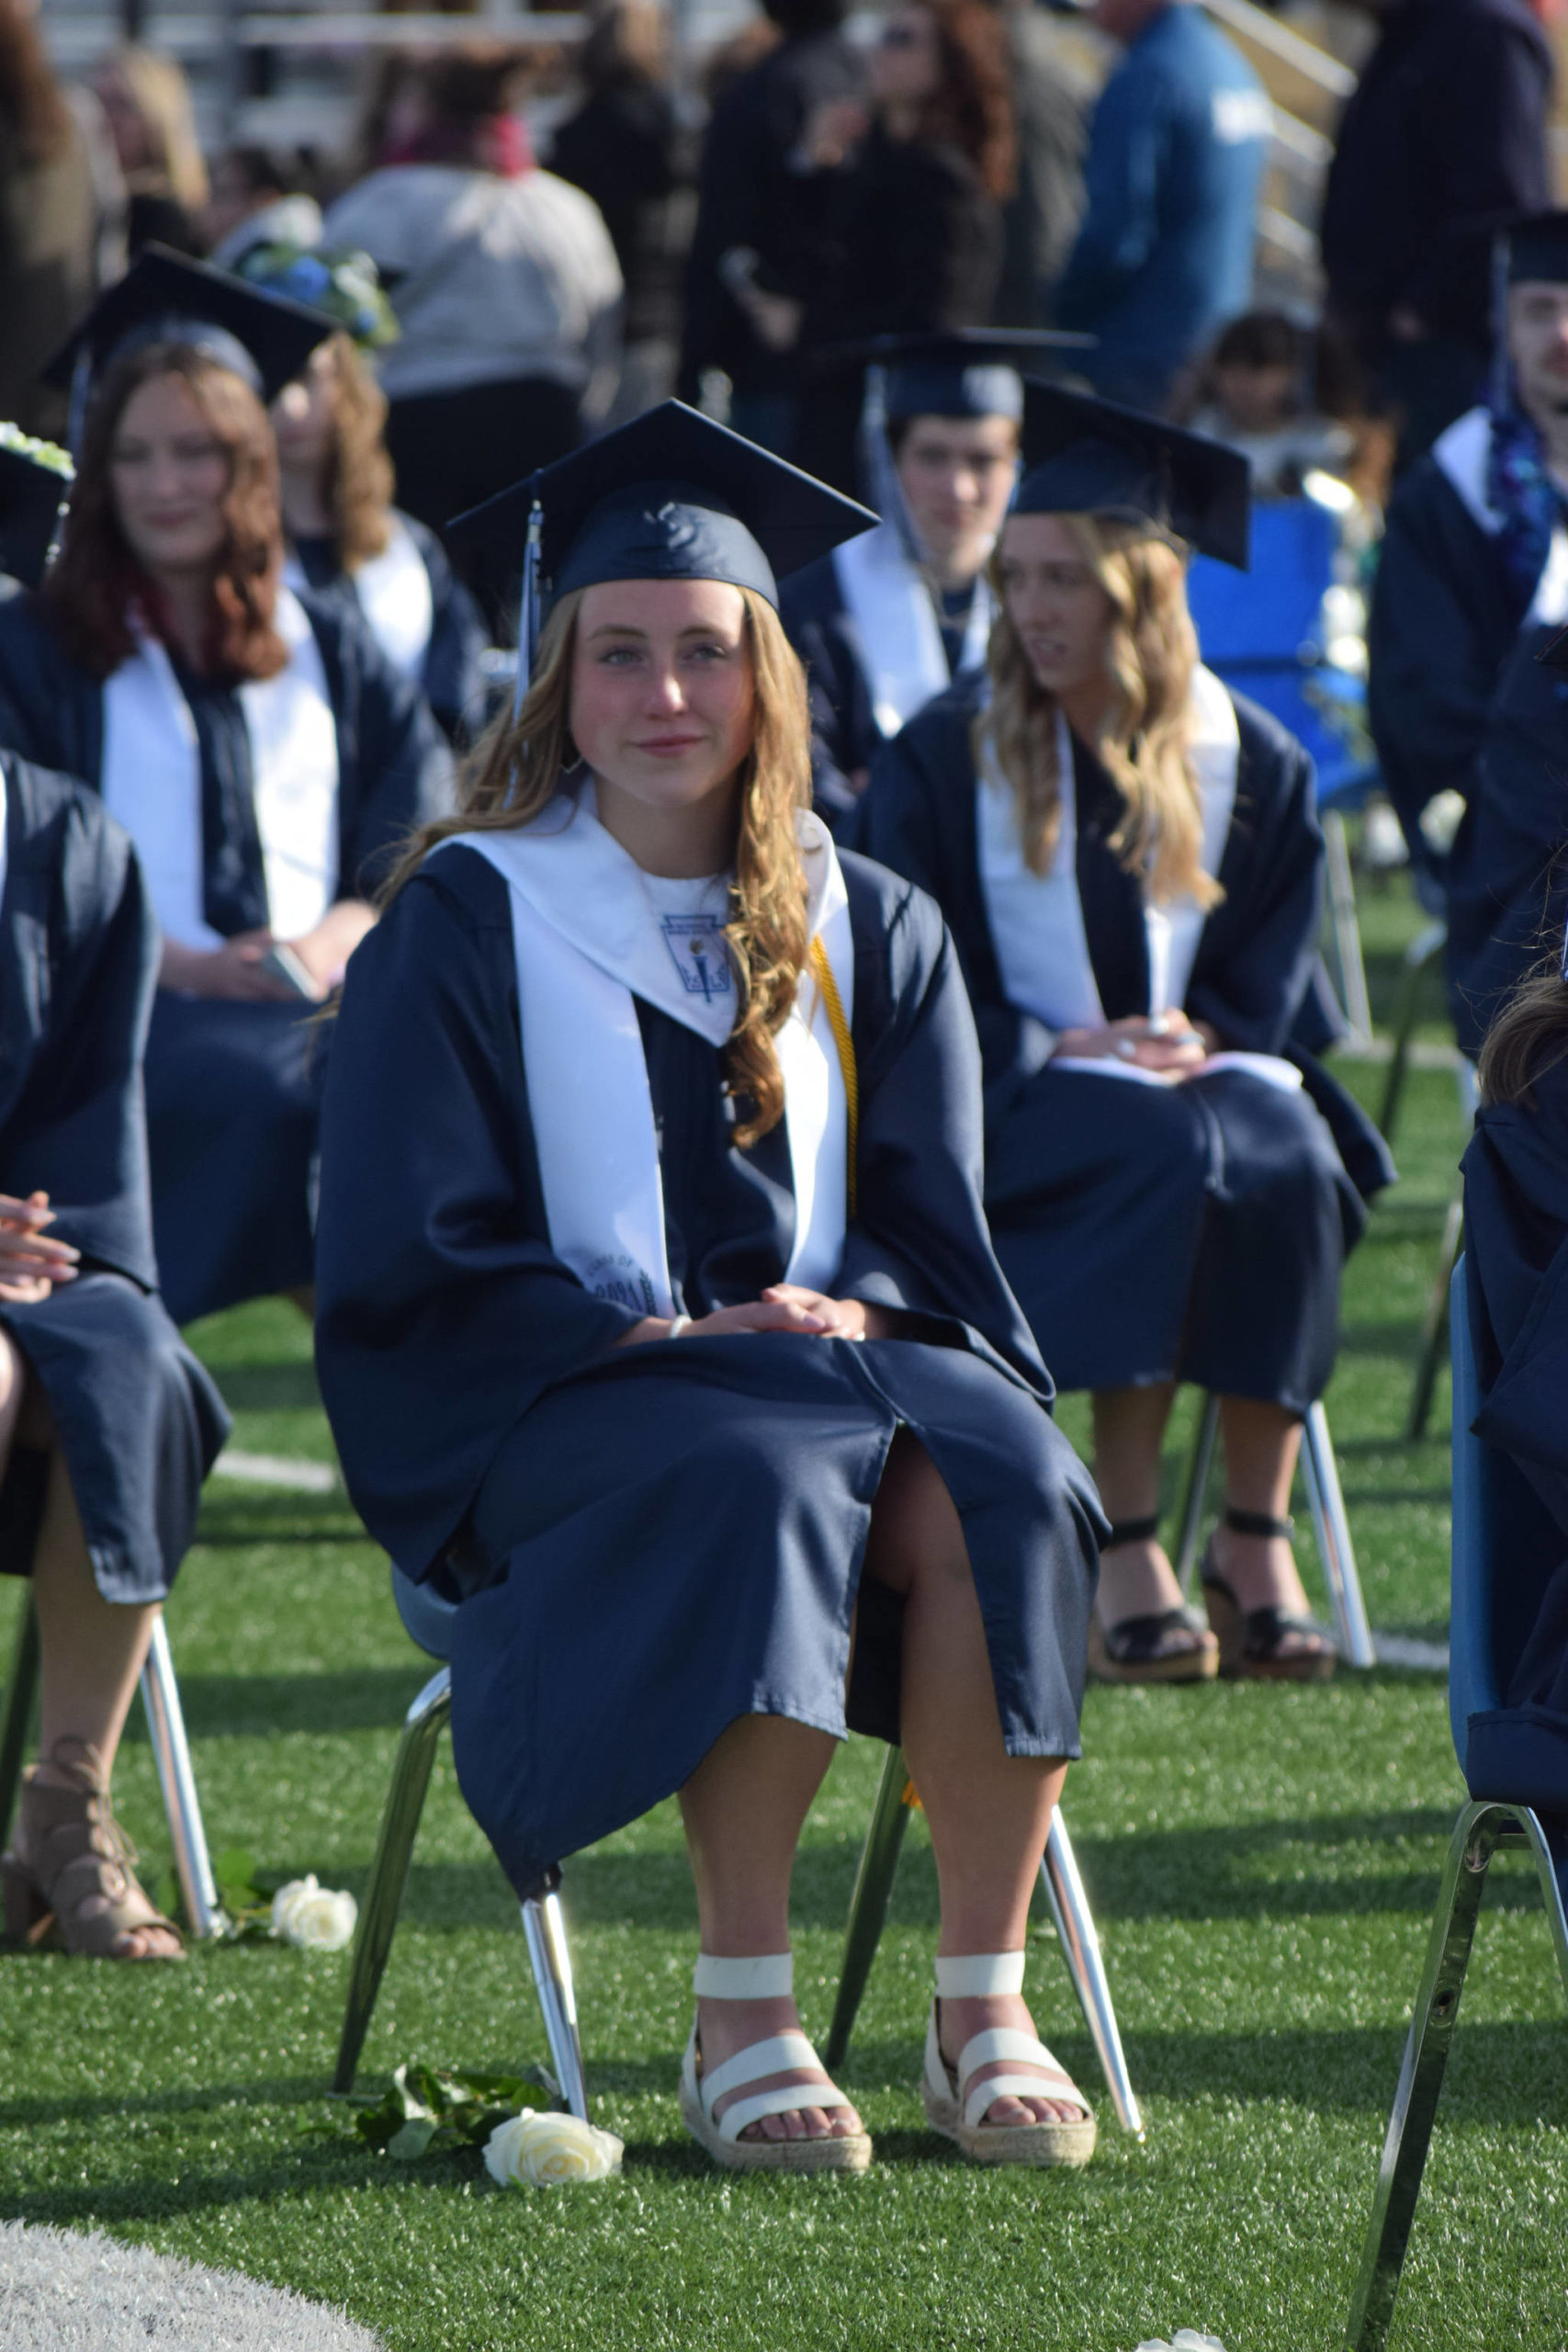 Soldotna High School class president and valedictorian Katie Delker celebrates her graduation on Tuesday, May 18, 2021 at the high school football field. (Camille Botello / Peninsula Clarion)